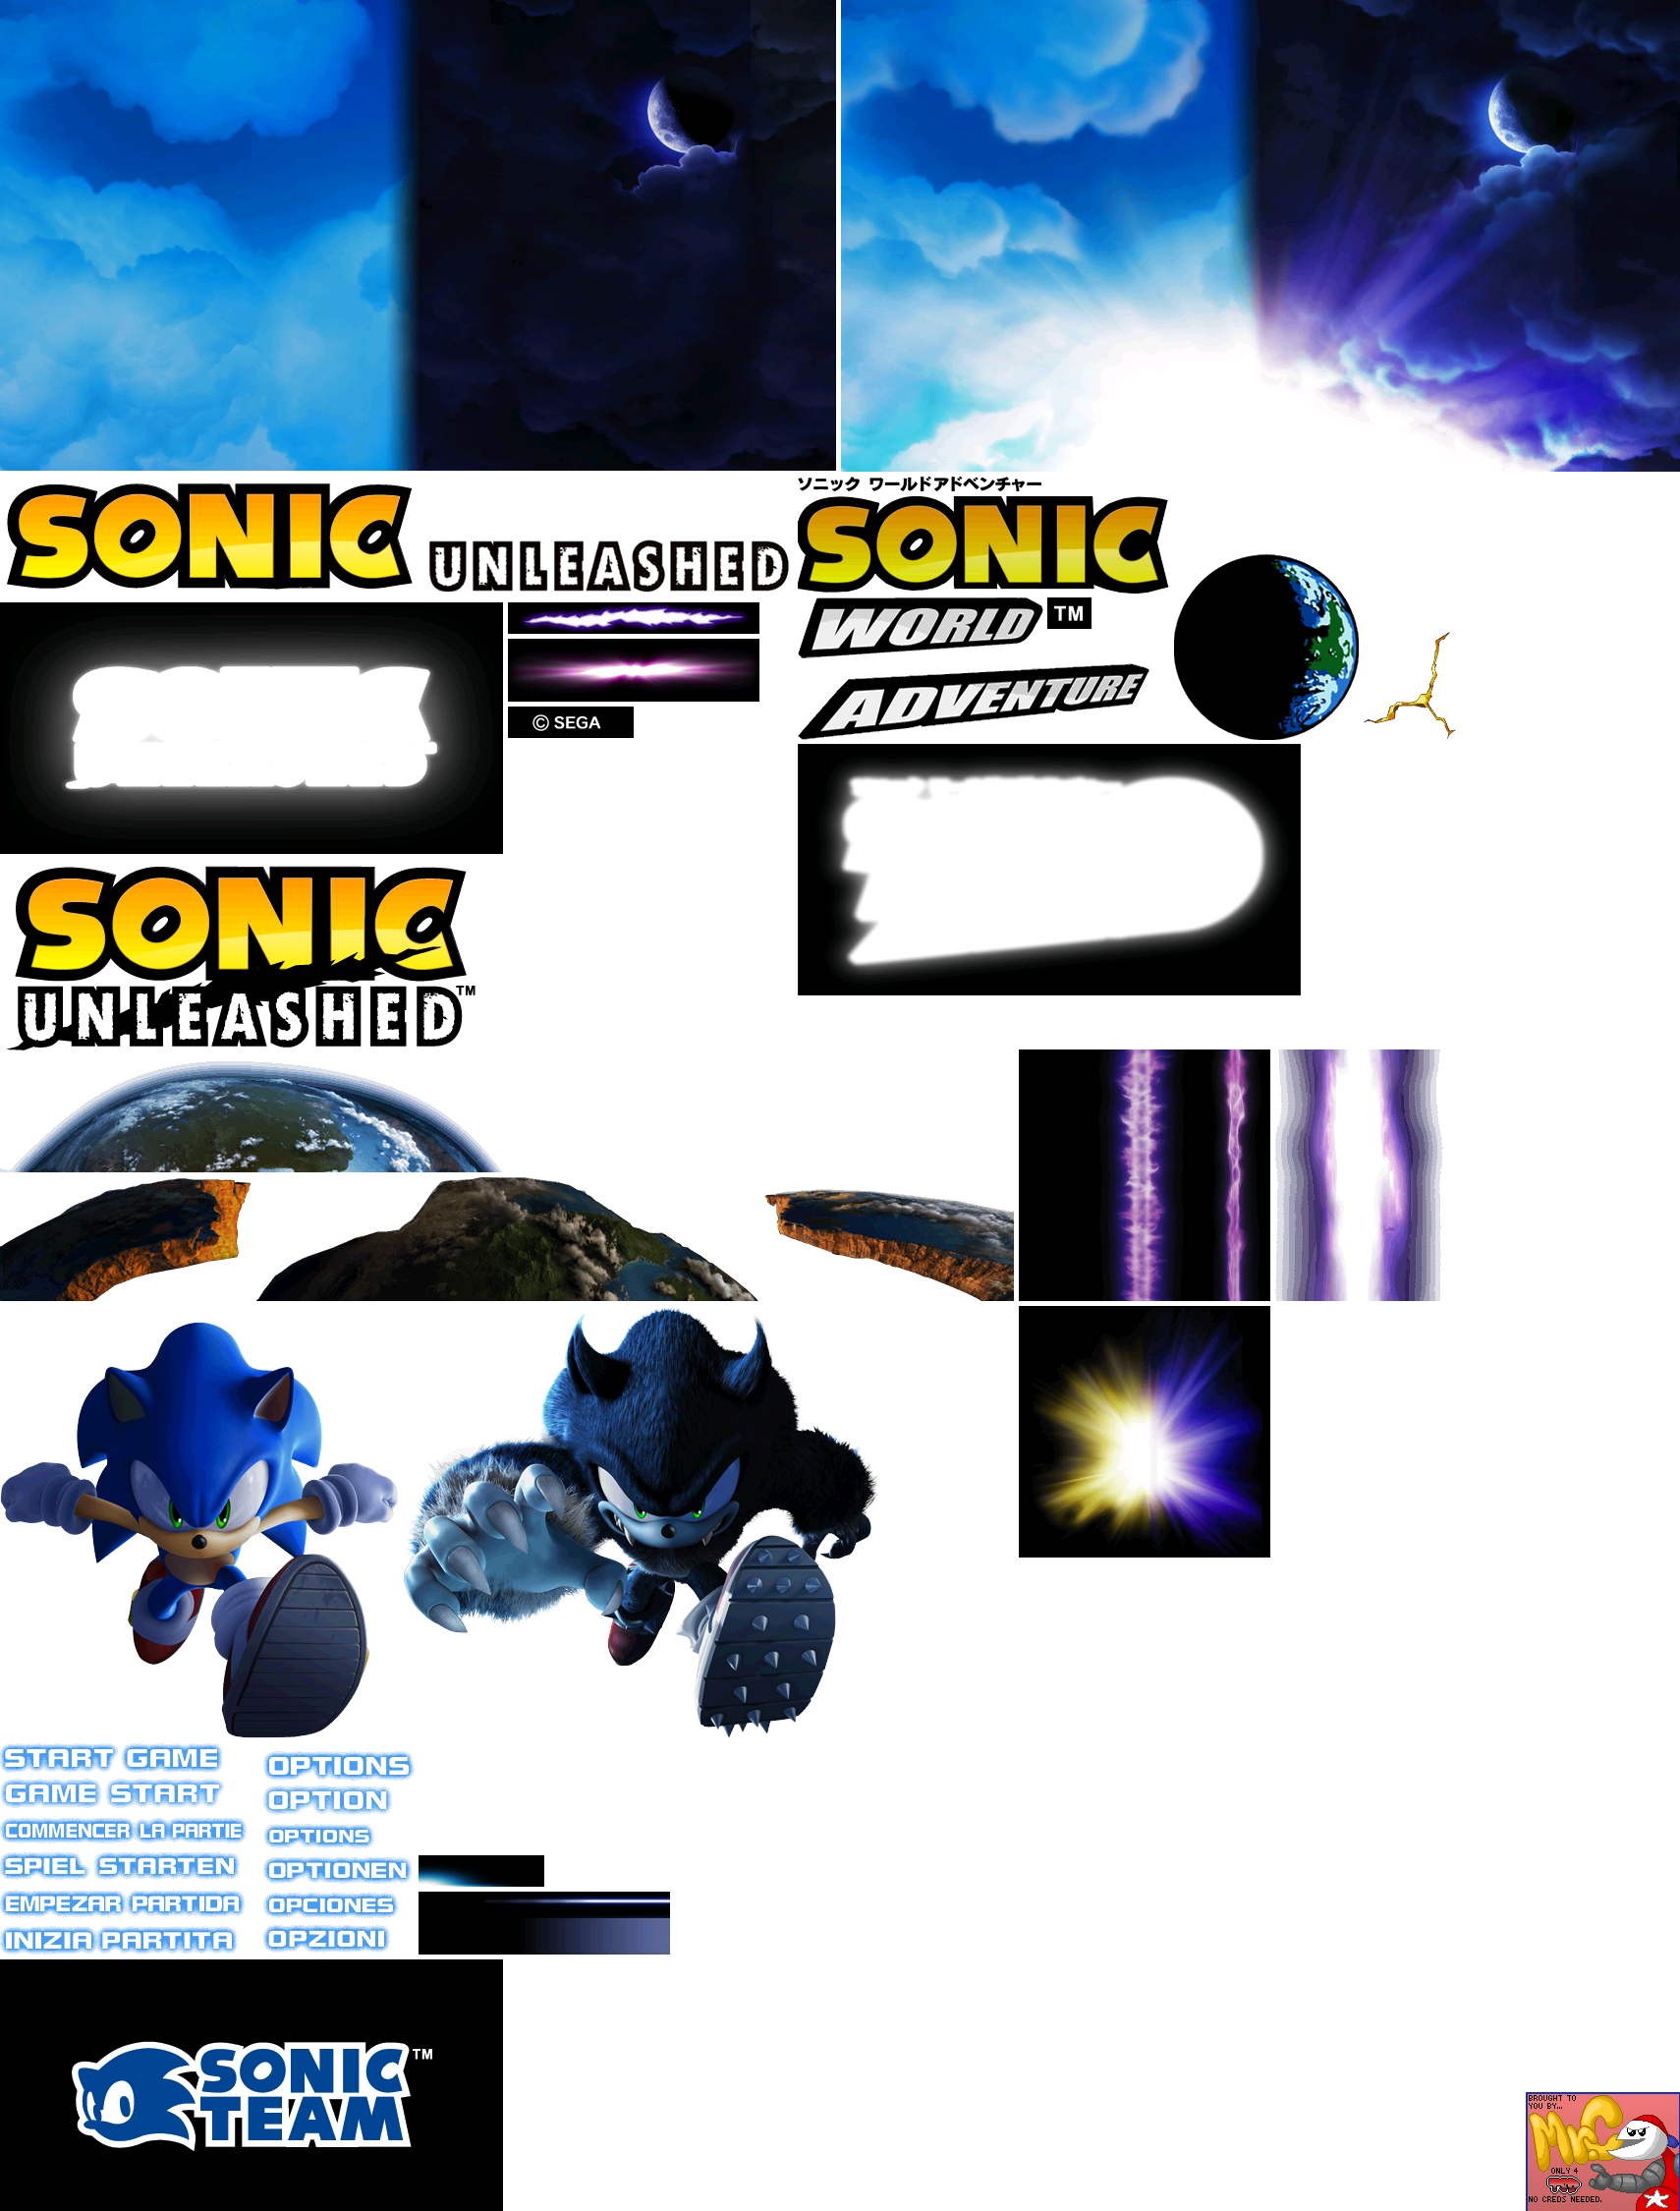 Sonic Unleashed / Sonic World Adventure - Title Screen